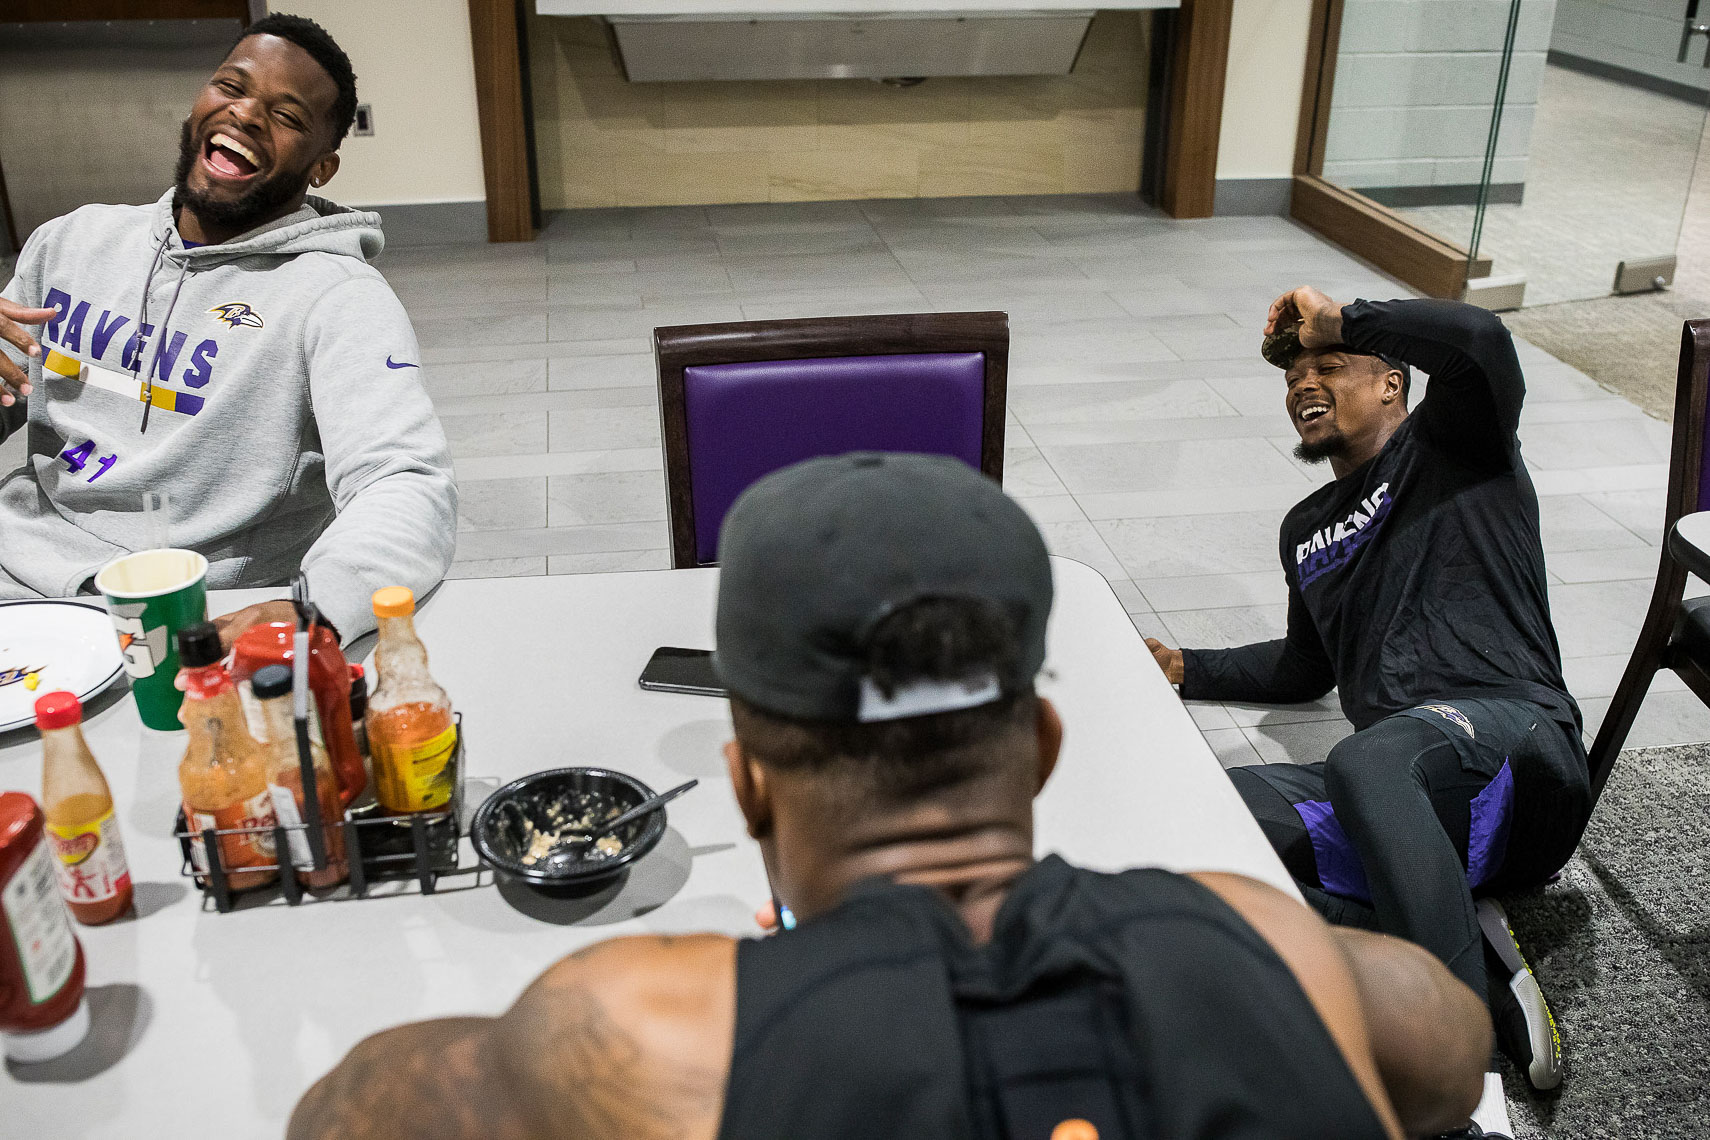 A day in the life of an NFL player documentary story by Baltimore photojournalist Shawn Hubbard